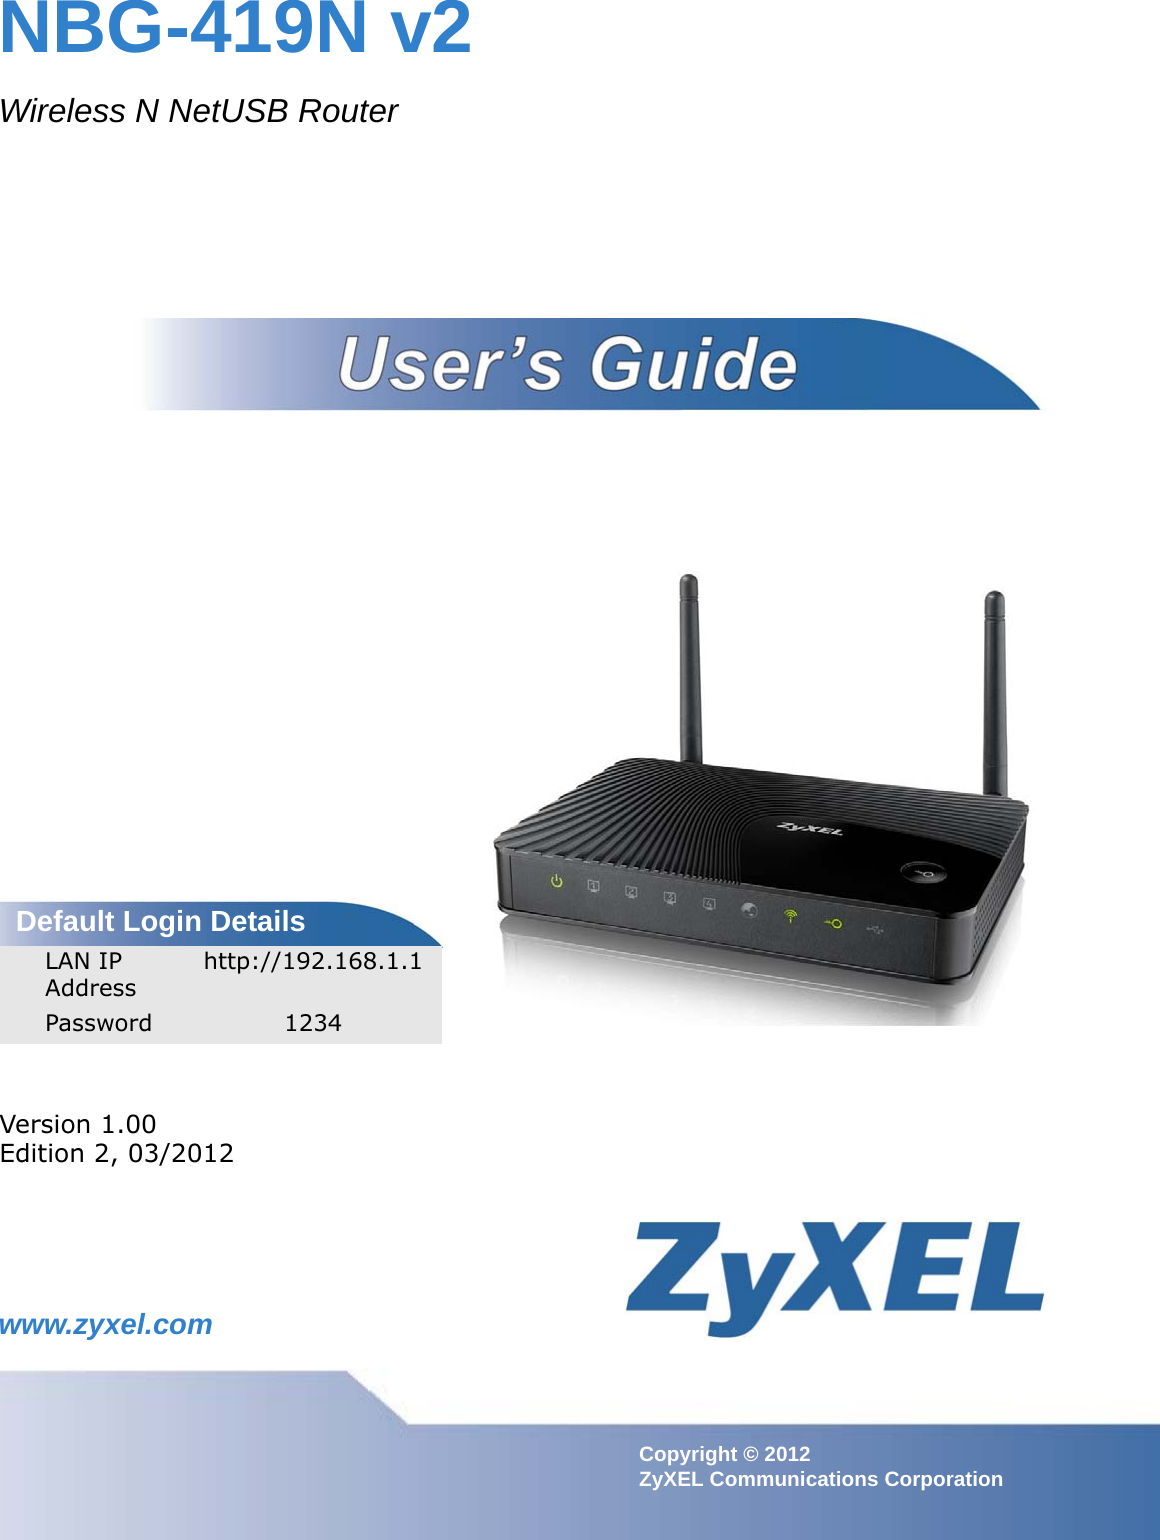 www.zyxel.comwww.zyxel.comNBG-419N v2Wireless N NetUSB RouterIMPORTANT!READ CAREFULLY BEFORE USE.KEEP THIS GUIDE FOR FUTURE REFERENCE.Copyright © 2012 ZyXEL Communications CorporationVersion 1.00Edition 2, 03/2012Default Login DetailsLAN IP Address http://192.168.1.1Password 1234